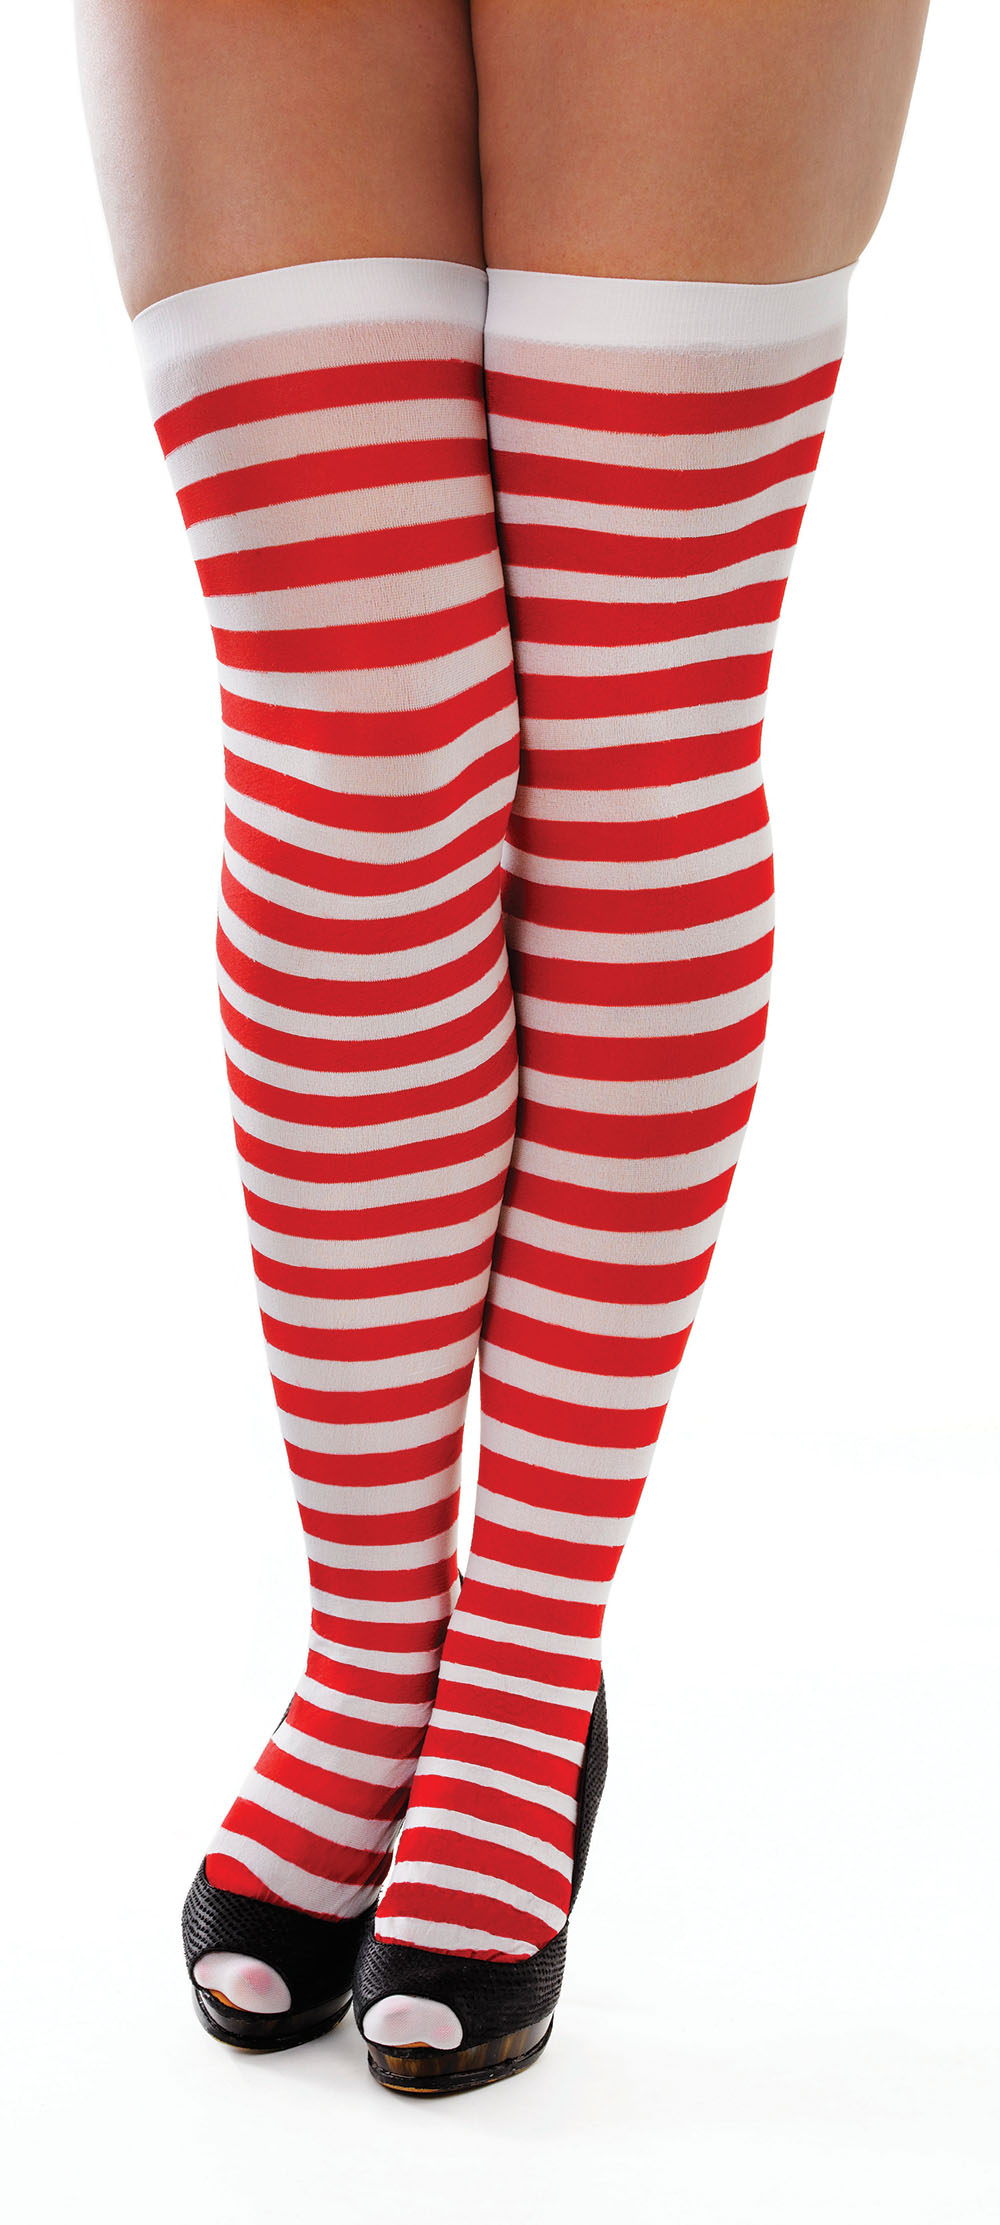 Striped Stockings. Red/White